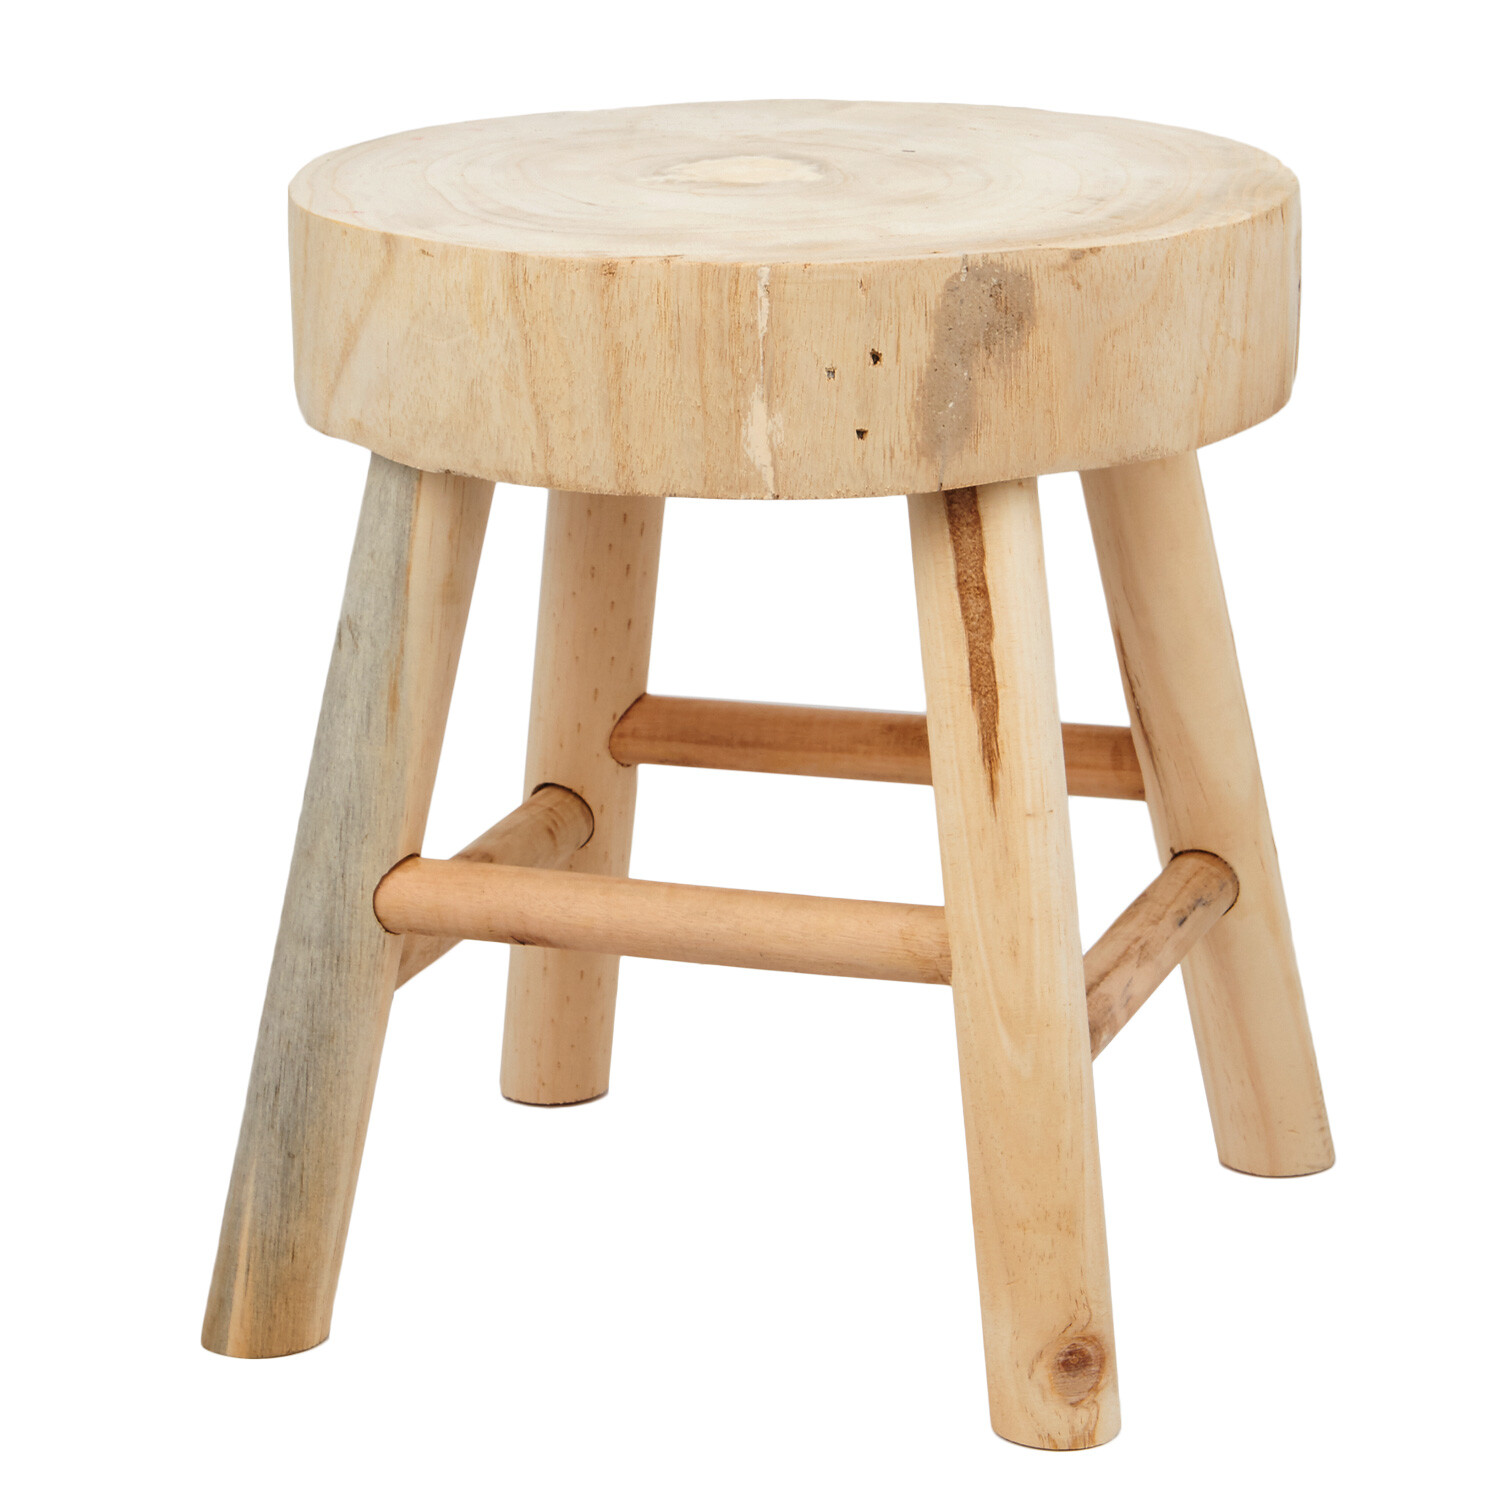 Wooden Footstool - Natural Image 2